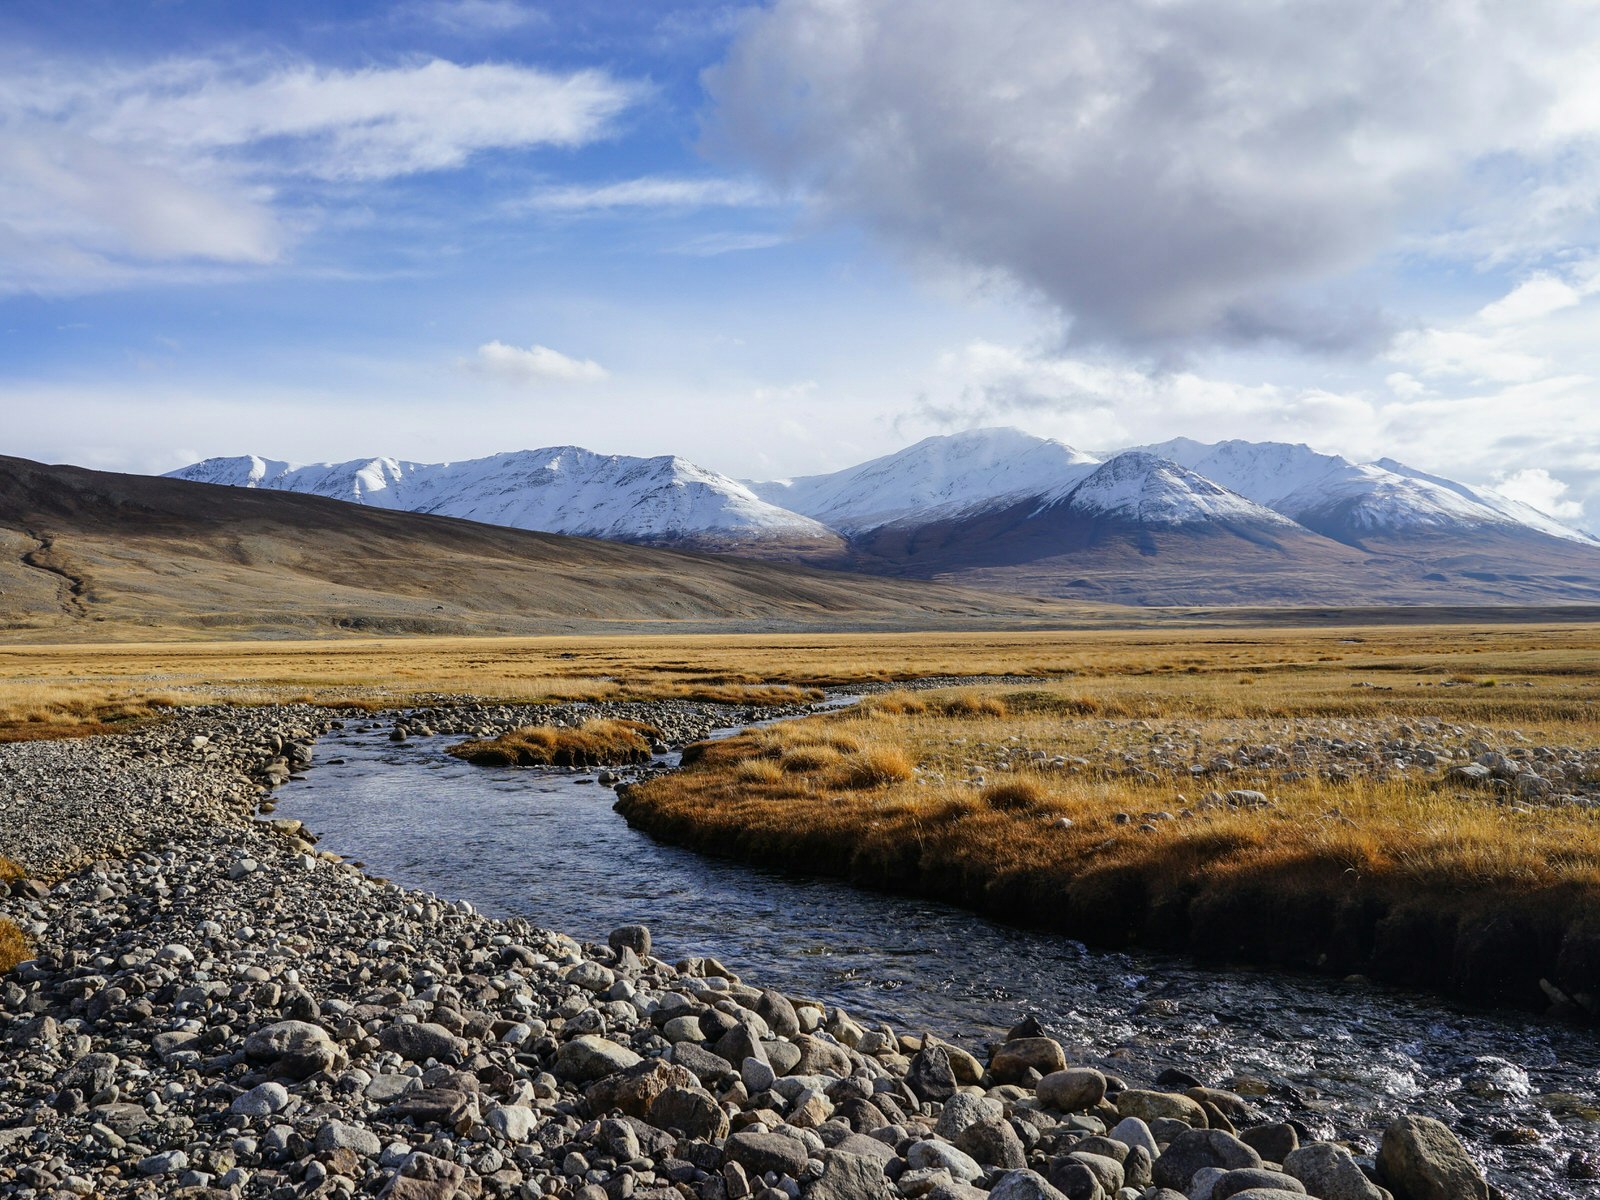 View of a river in the foreground with yellowed grass meadow and snow-capped mountains in background